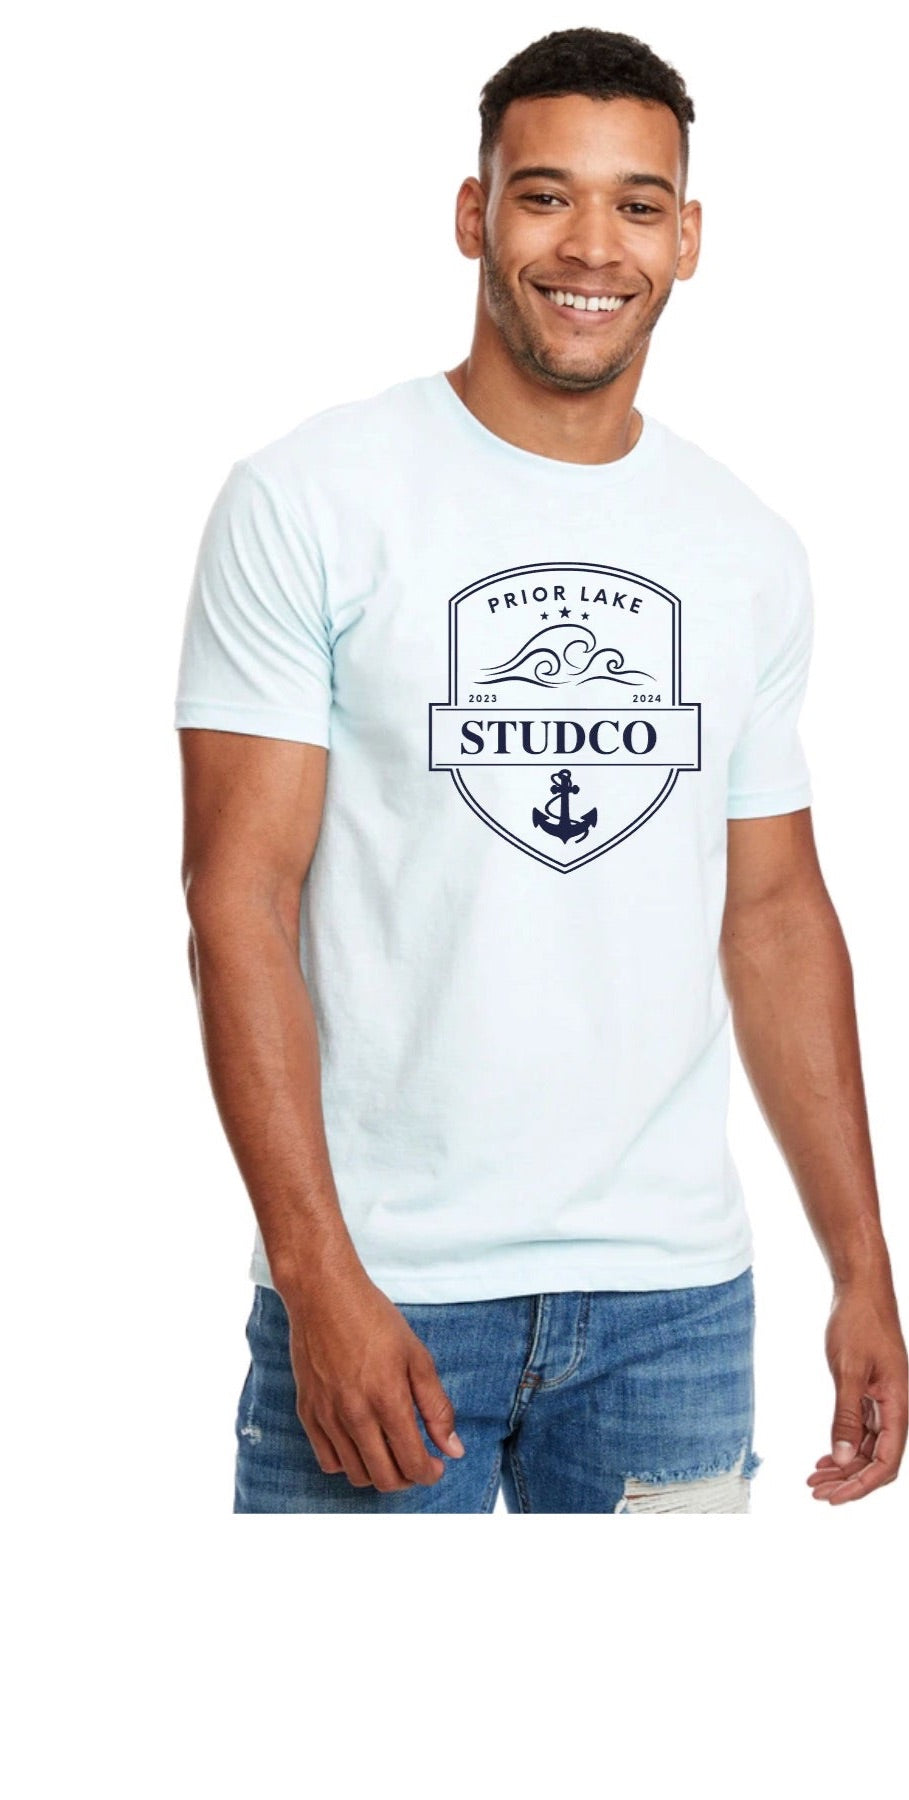 PL Student council Tees